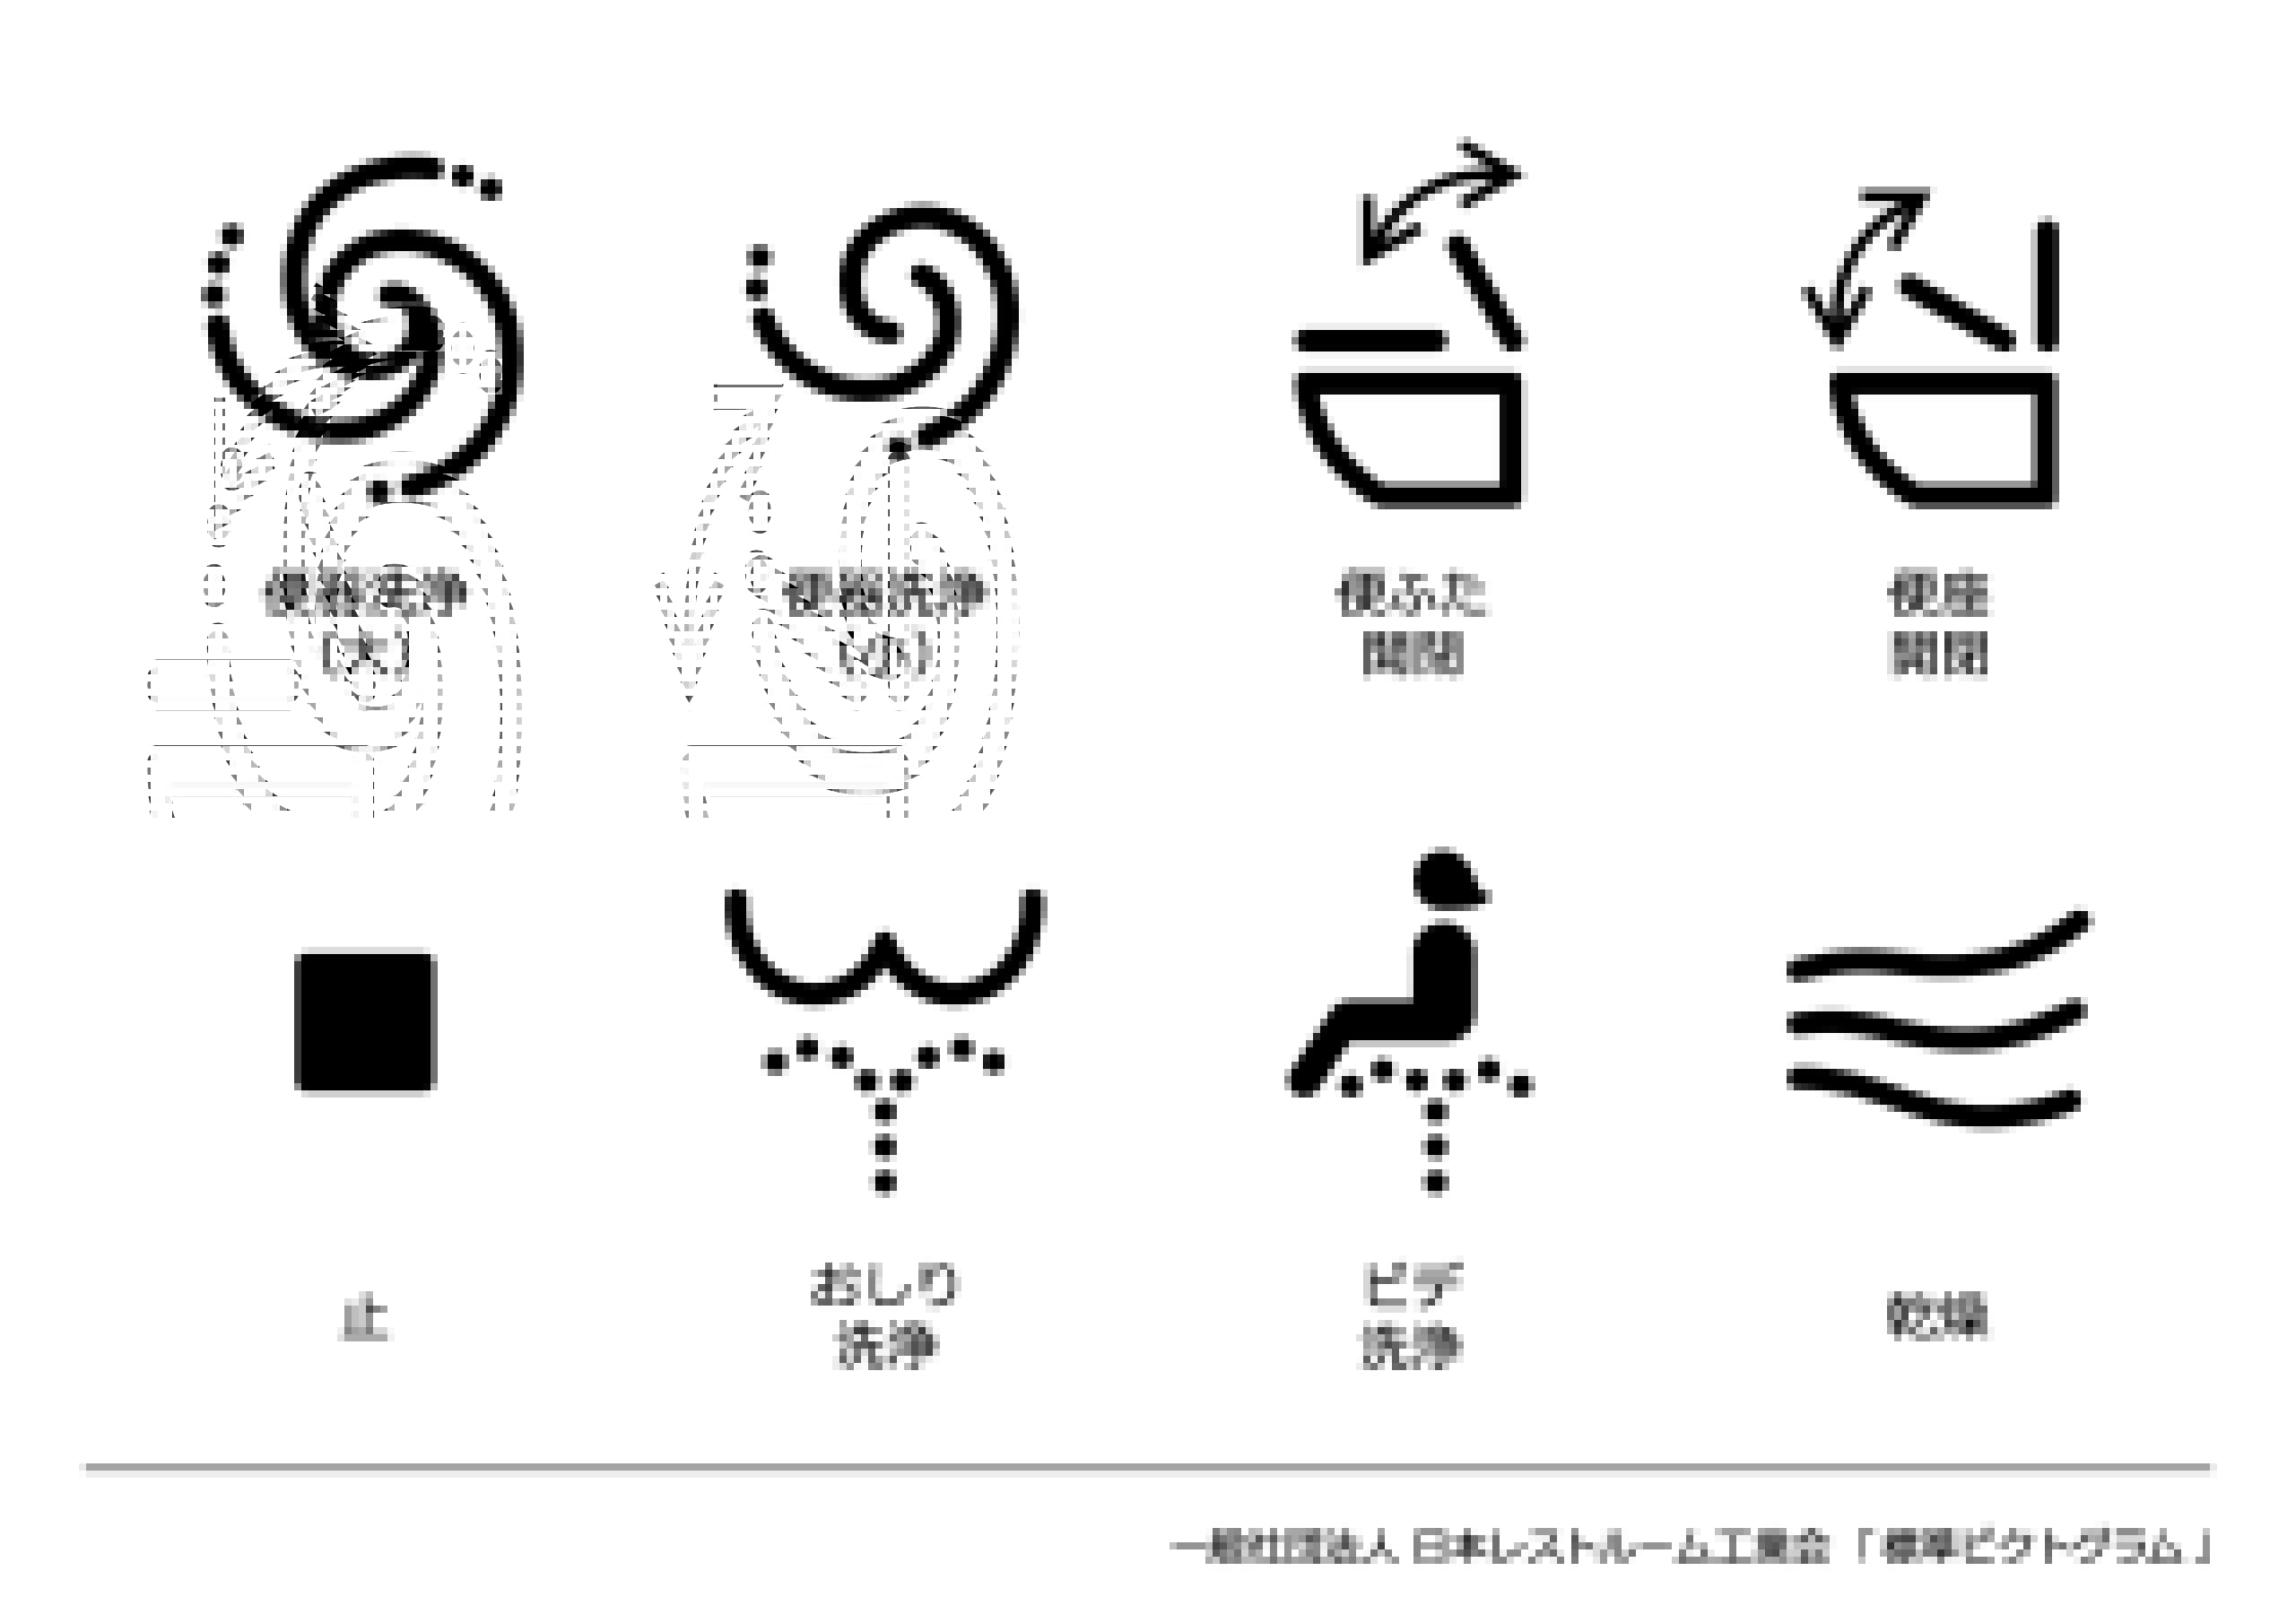 Japanese Toilet Makers Agree To Simplify Control Buttons For Confused Foreigners